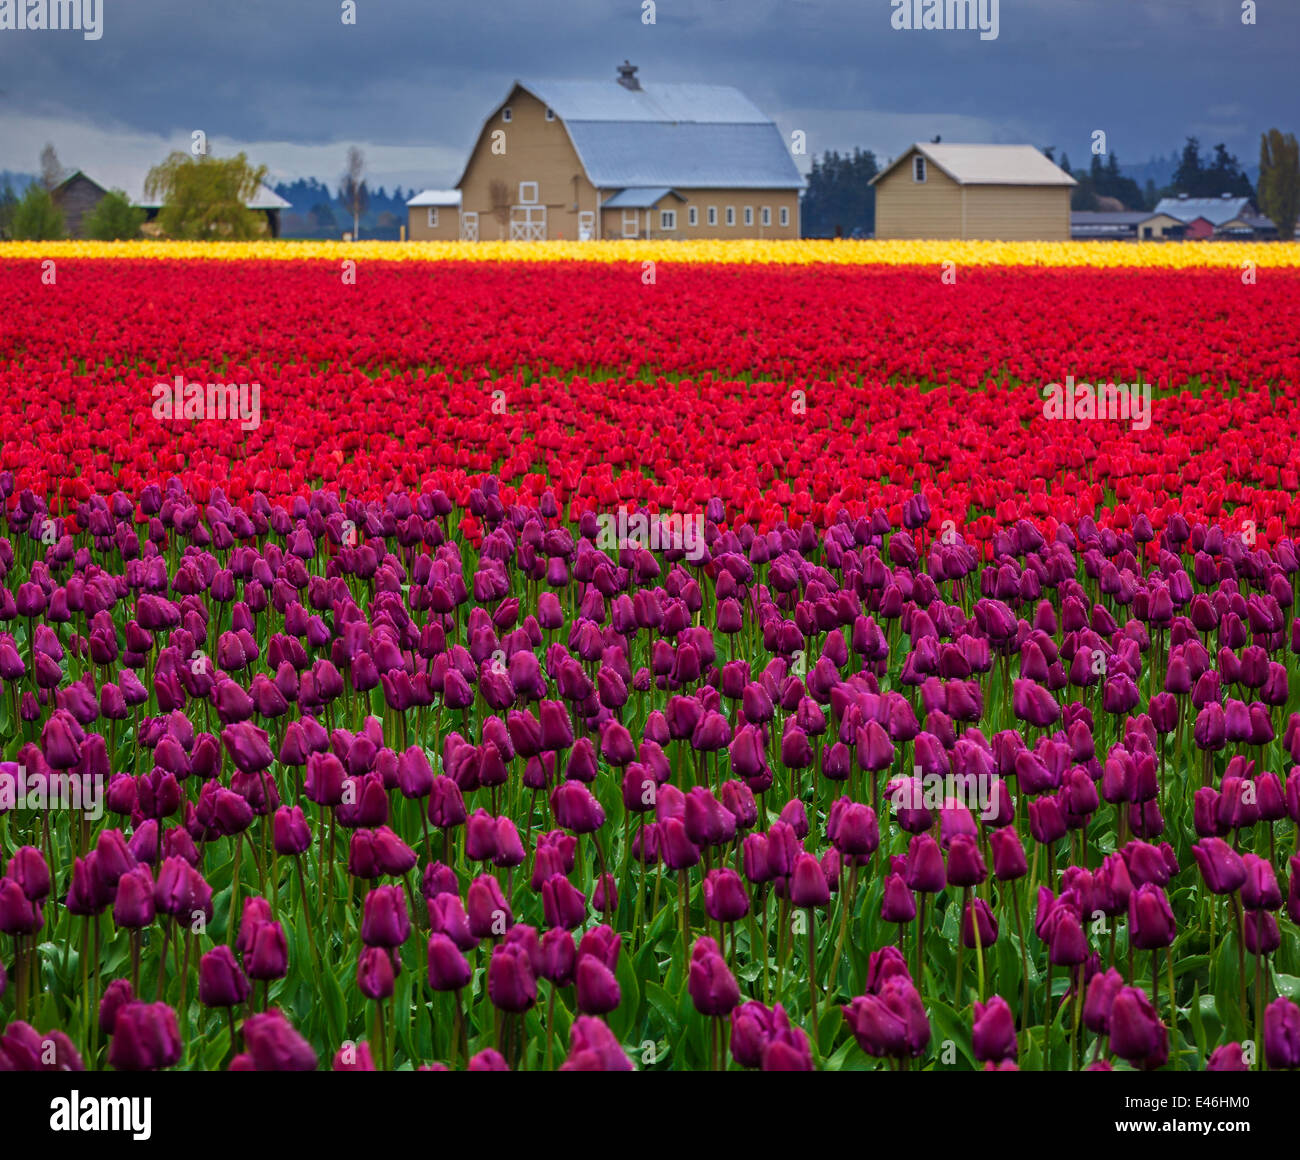 Skagit County, WA: Rows of purple and red tulips blooming with barn in the distance. Stock Photo